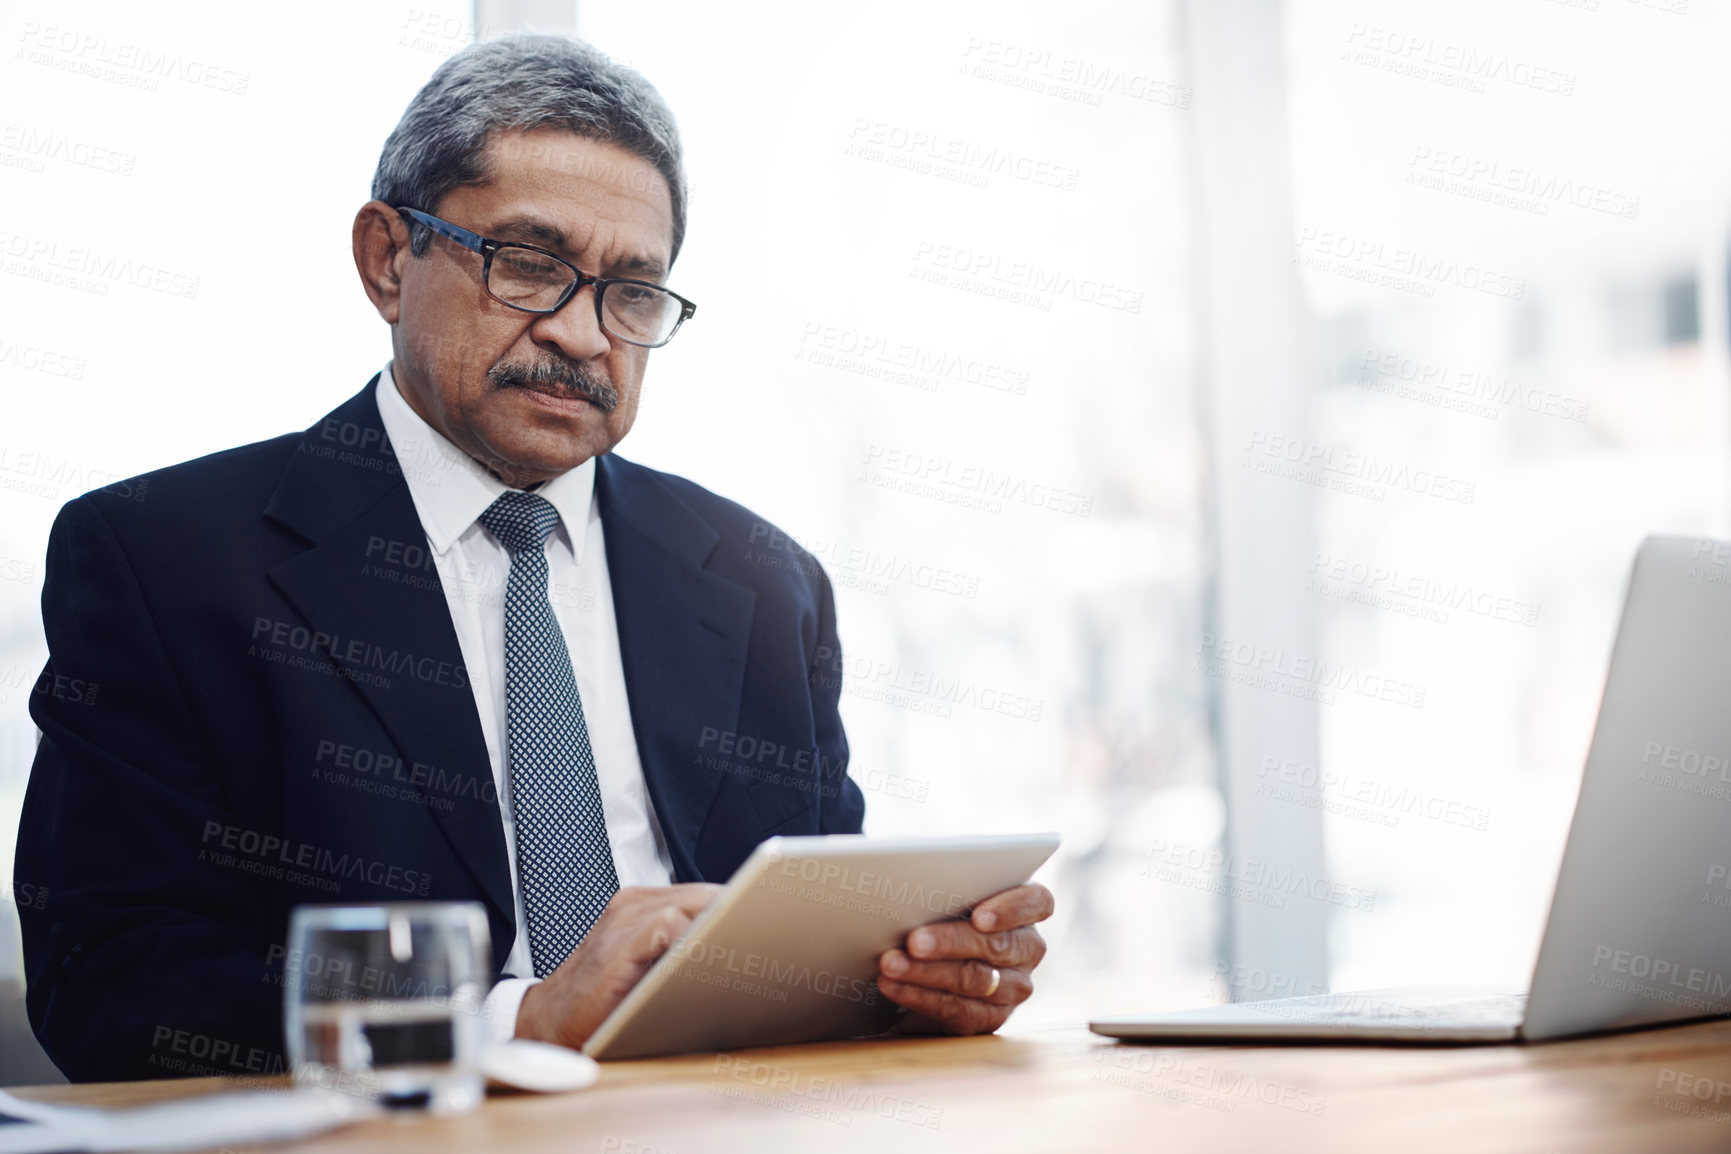 Buy stock photo Shot of a mature businessman working on a digital tablet in an office